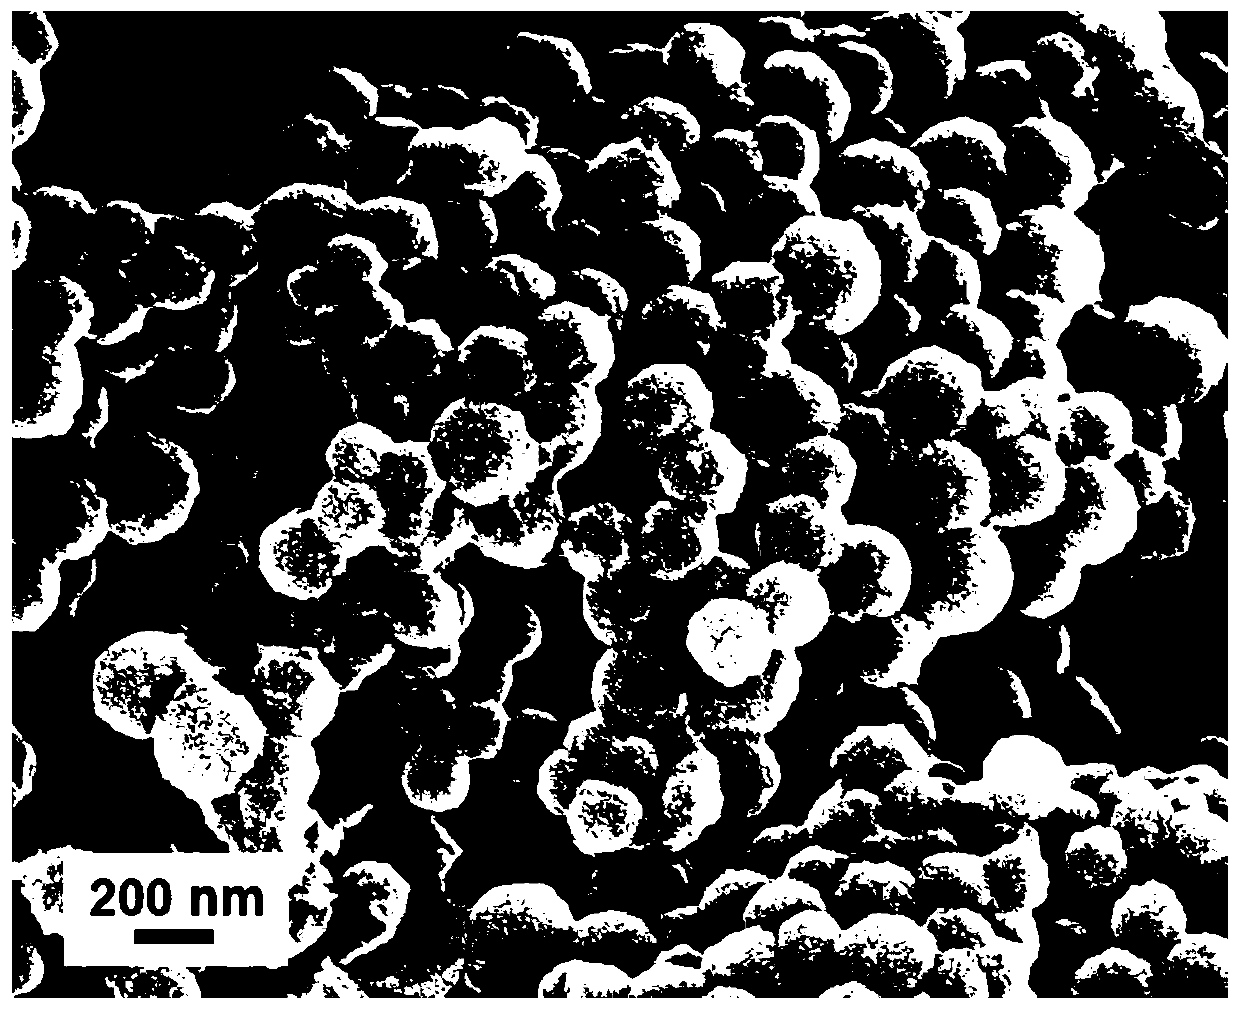 Nitrogen-doped porous carbon non-metal catalyst and preparation method thereof, and application of nitrogen-doped porous carbon non-metal catalyst in oxidation-reduction reaction